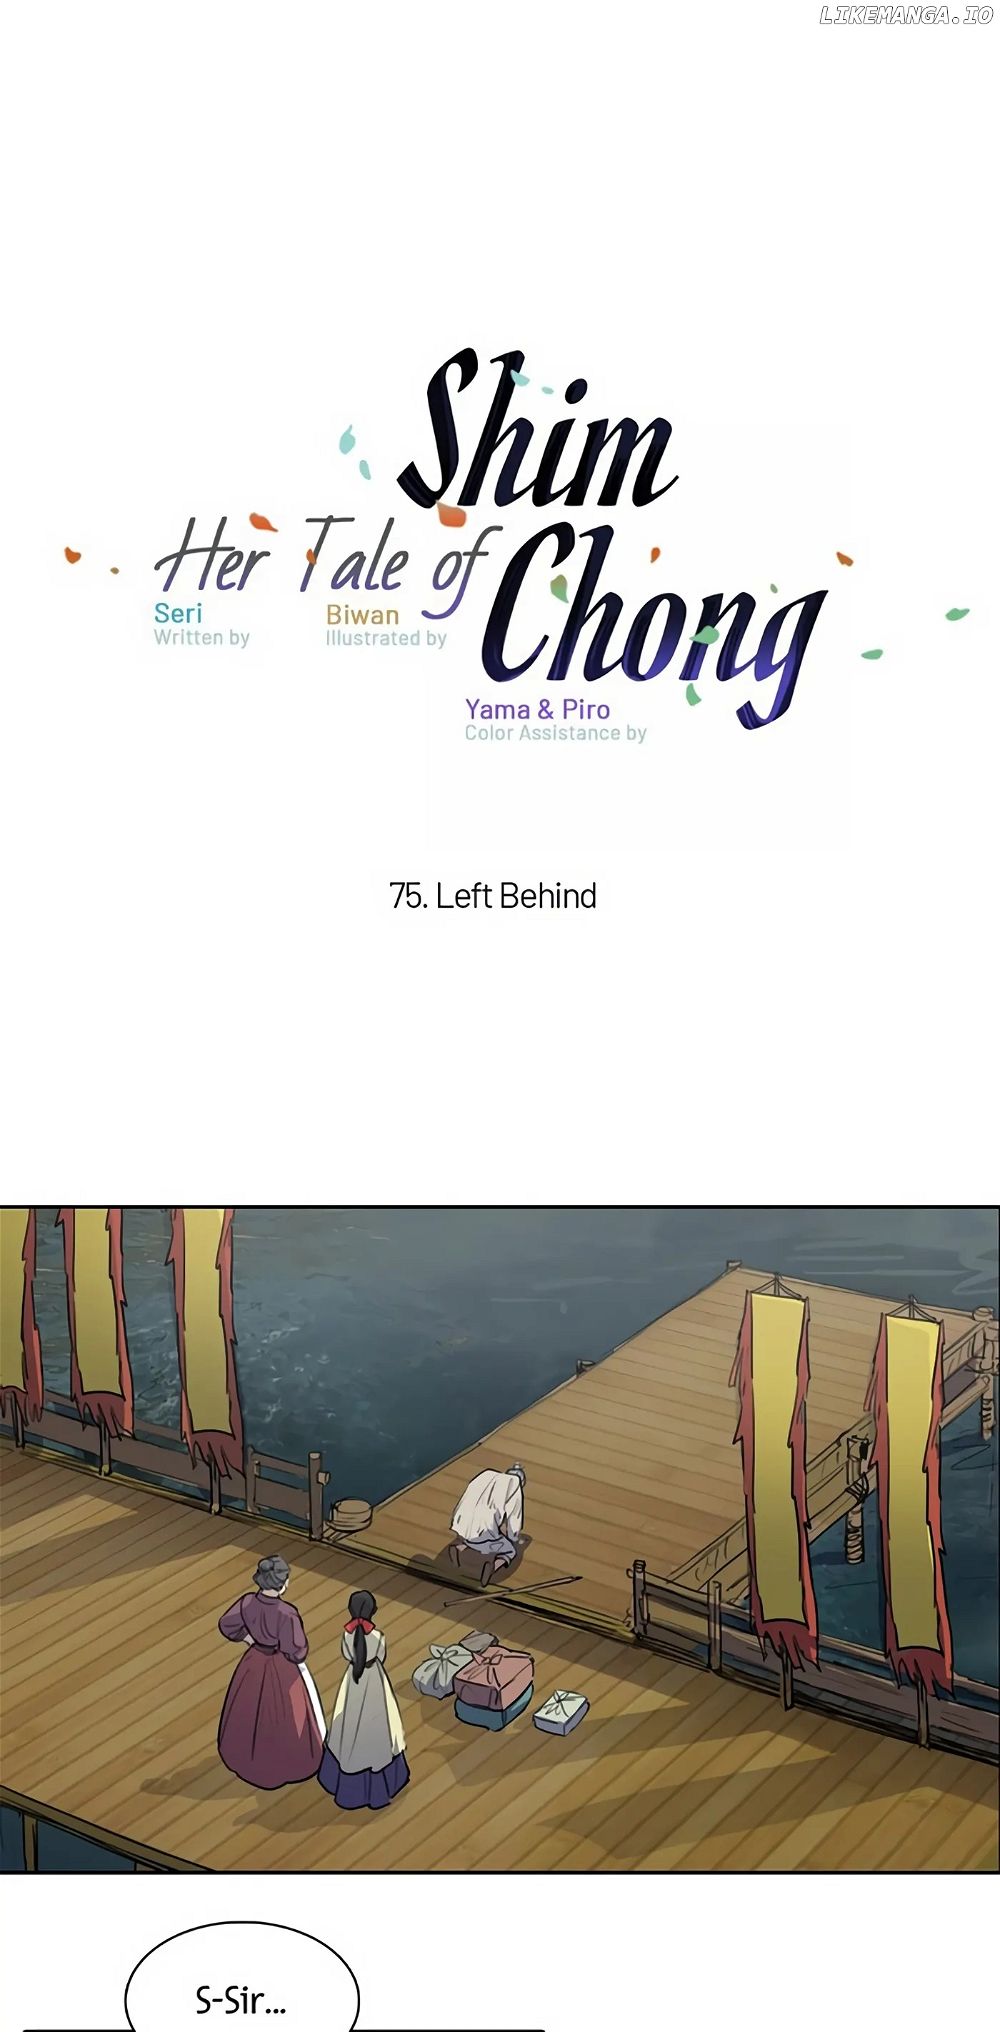 Her Tale of Shim Chong Chapter 75 - Page 1